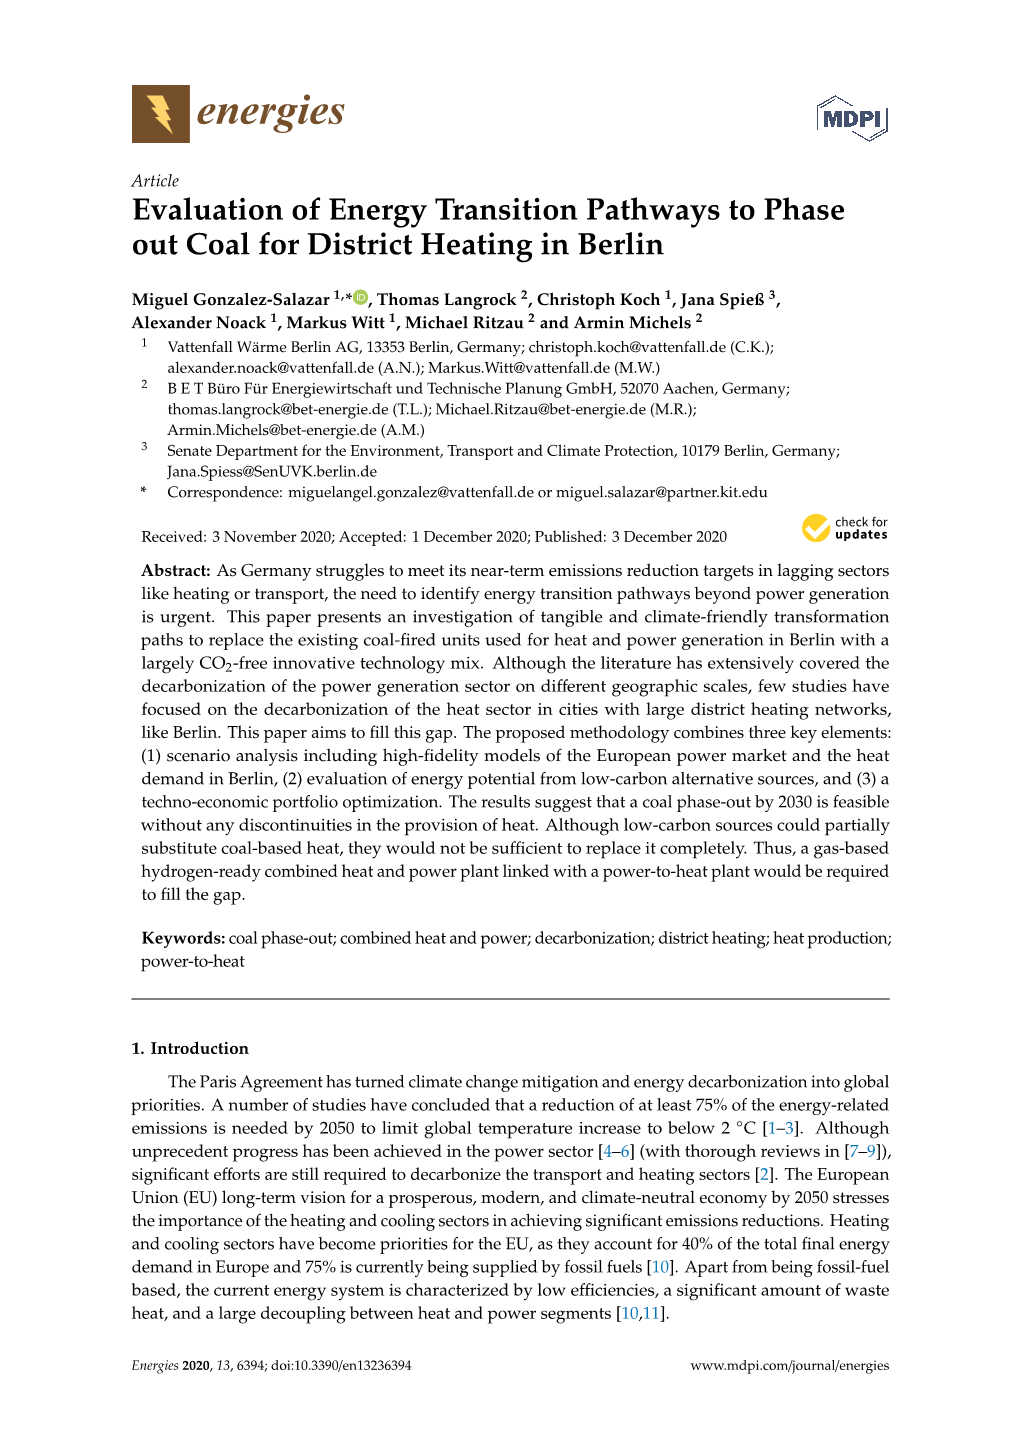 Evaluation of Energy Transition Pathways to Phase out Coal for District Heating in Berlin